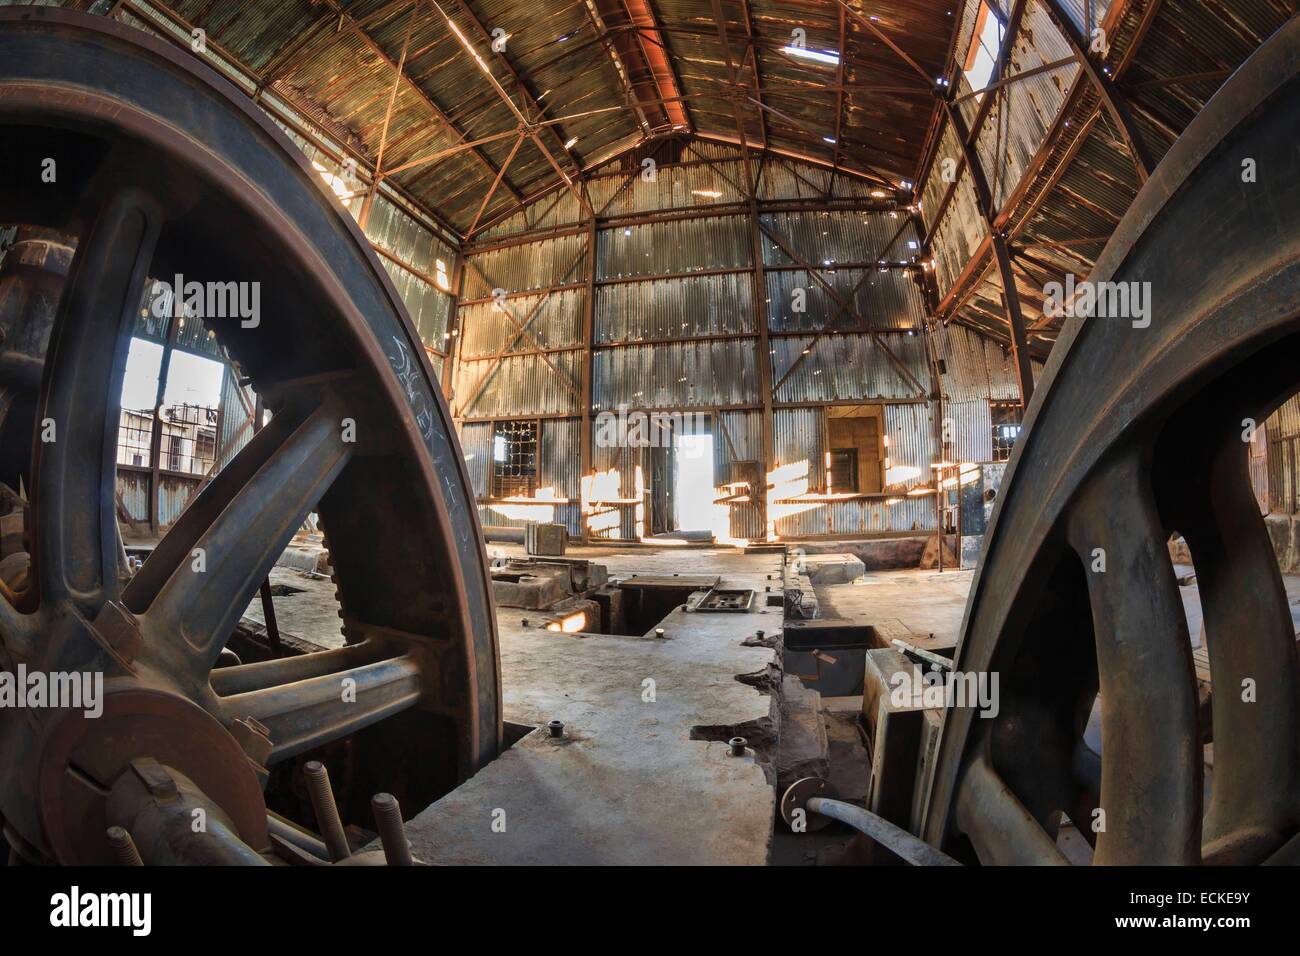 Chile, El Norte Grande, Tarapaca Region, Iquique, Humberstone and Santa Laura Saltpeter Works, listed as World Heritage by UNESCO, Engine House Stock Photo